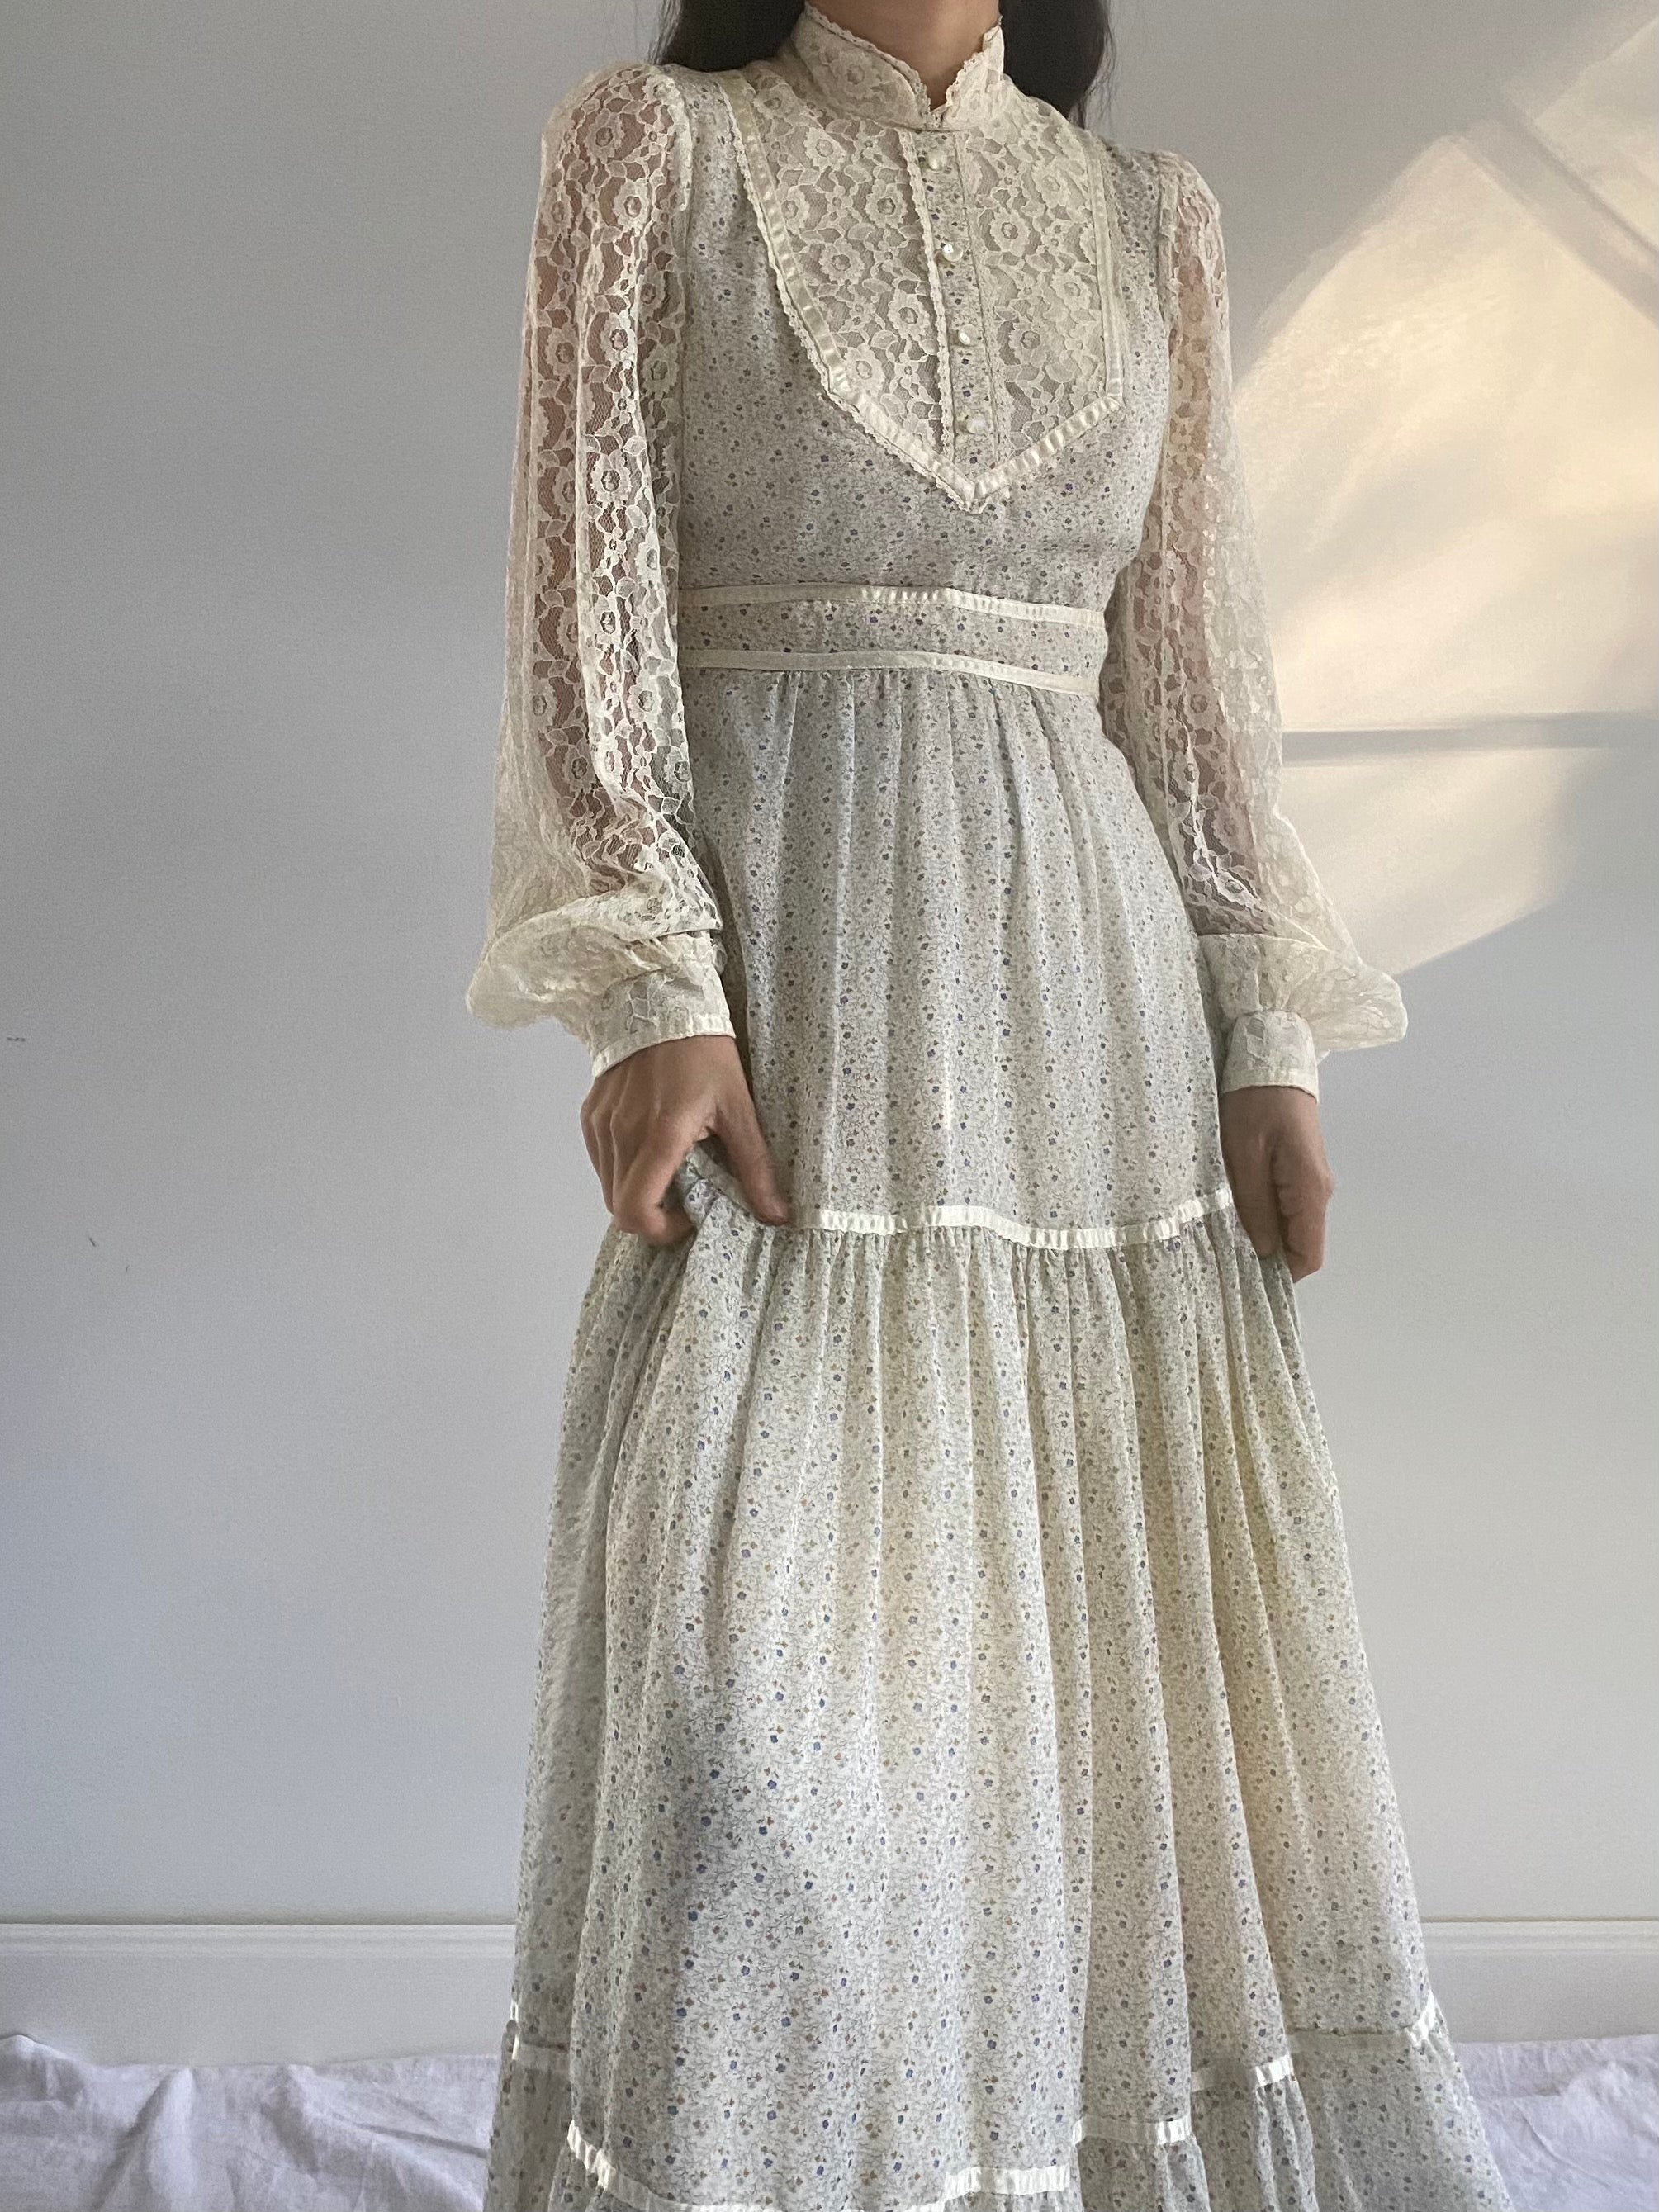 Vintage Lace Sleeves Calico Dress - XS/S | G O S S A M E R